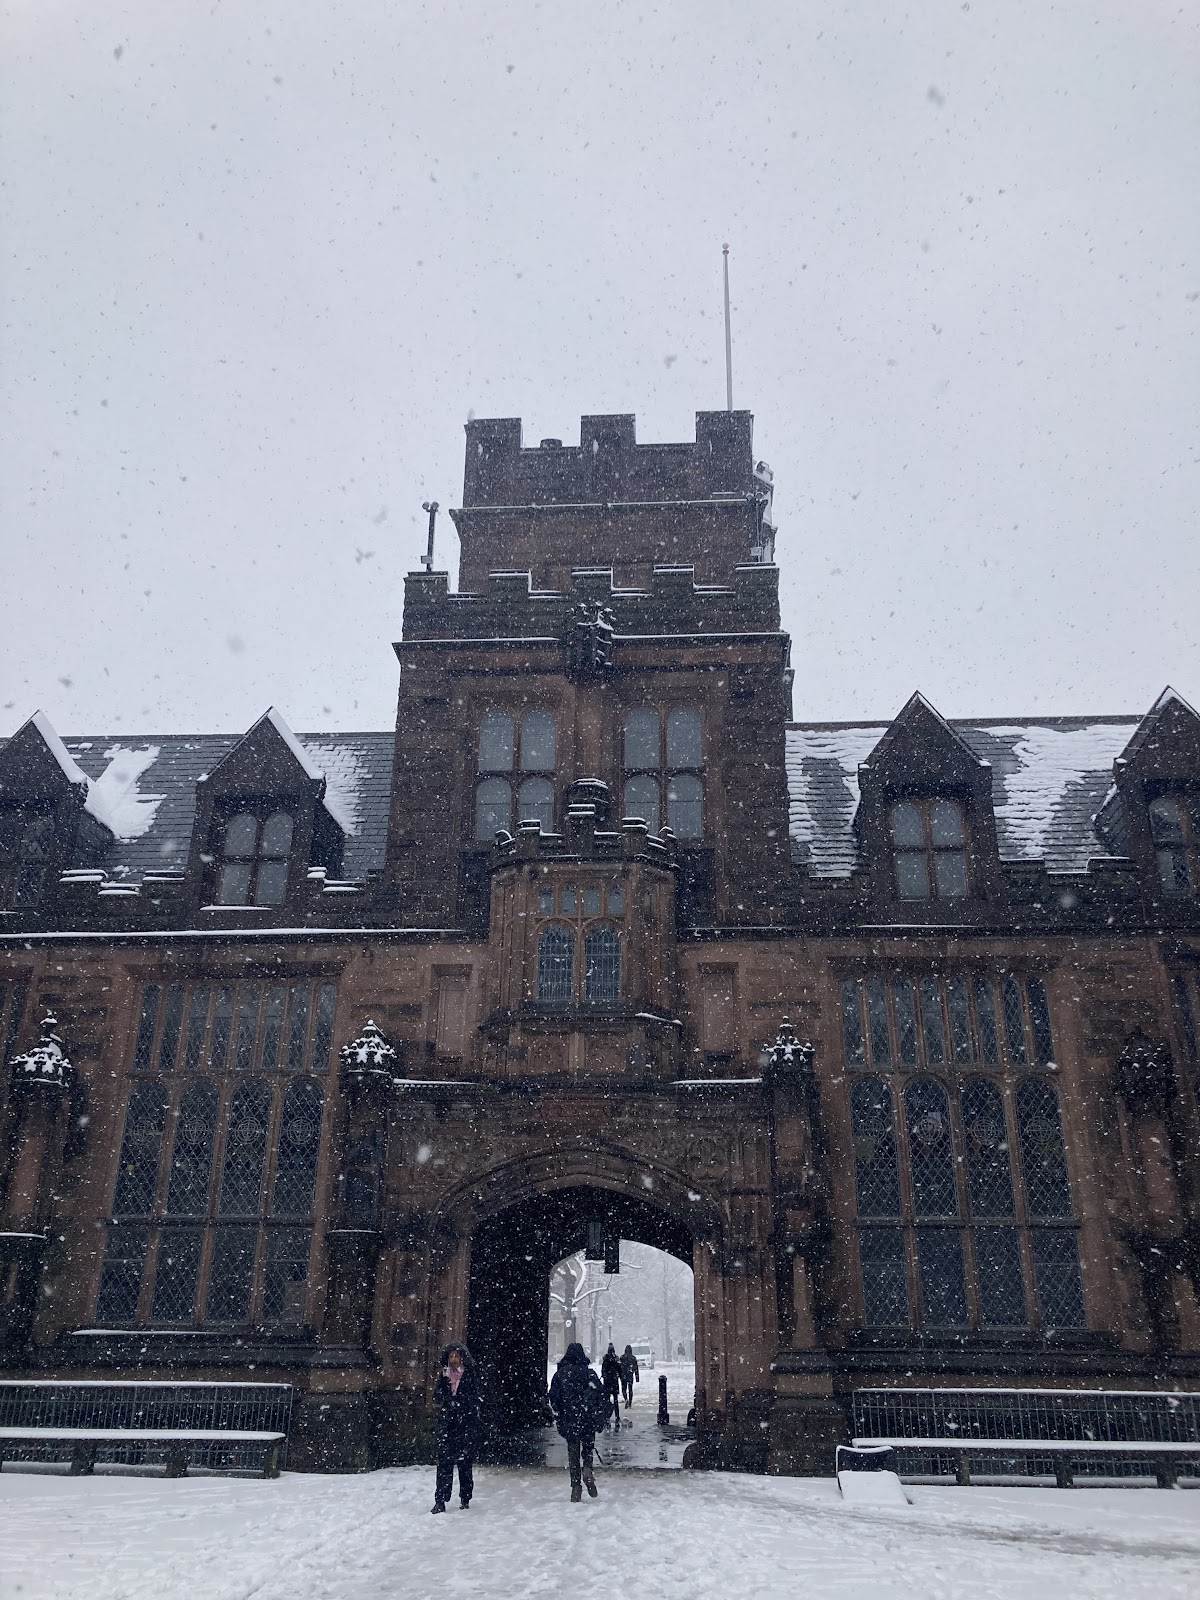 Snow covers the ground and flurries from the sky outside East Pyne Hall